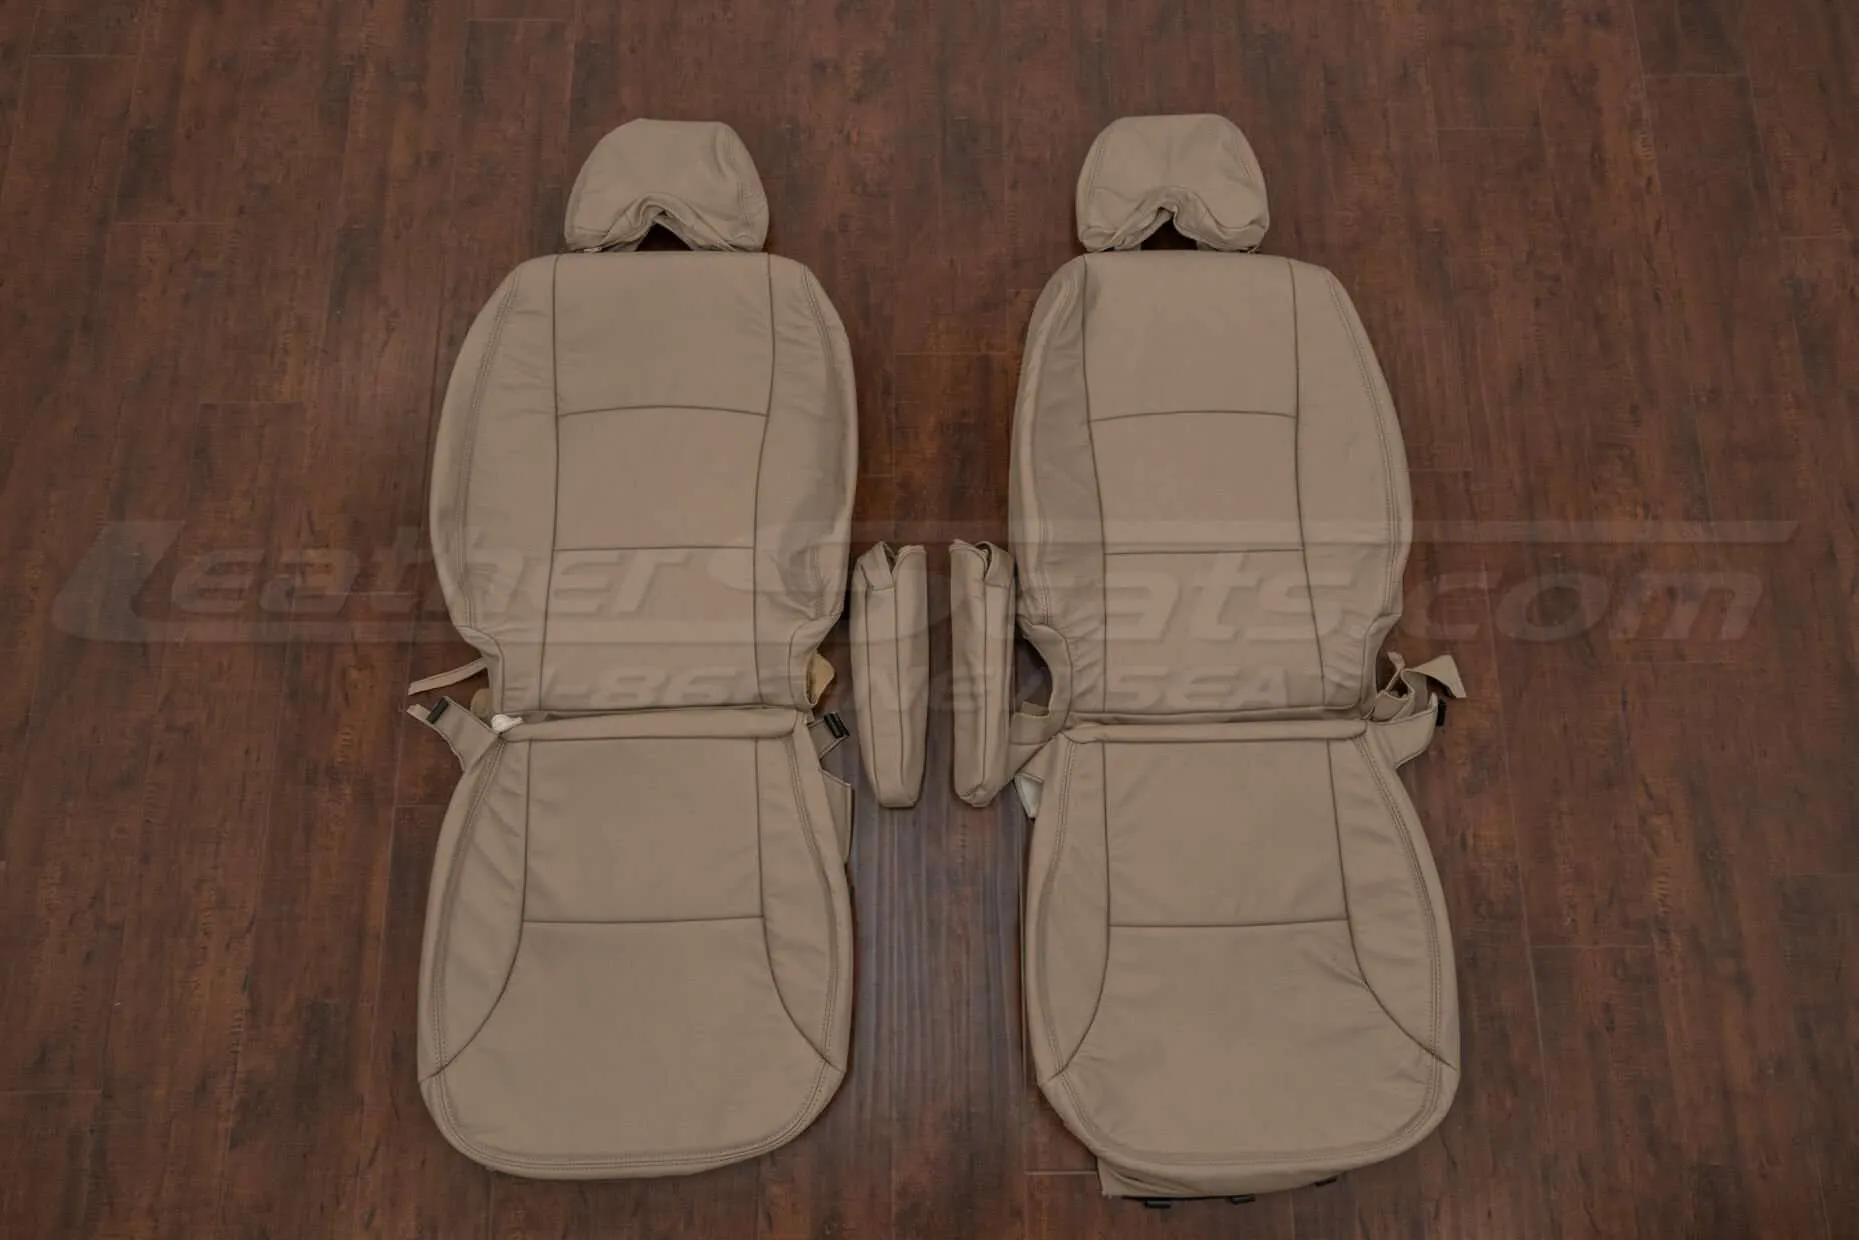 Honda CRV Leather Seat Kit- Sandstone - Front seat uphlstery with Armrests